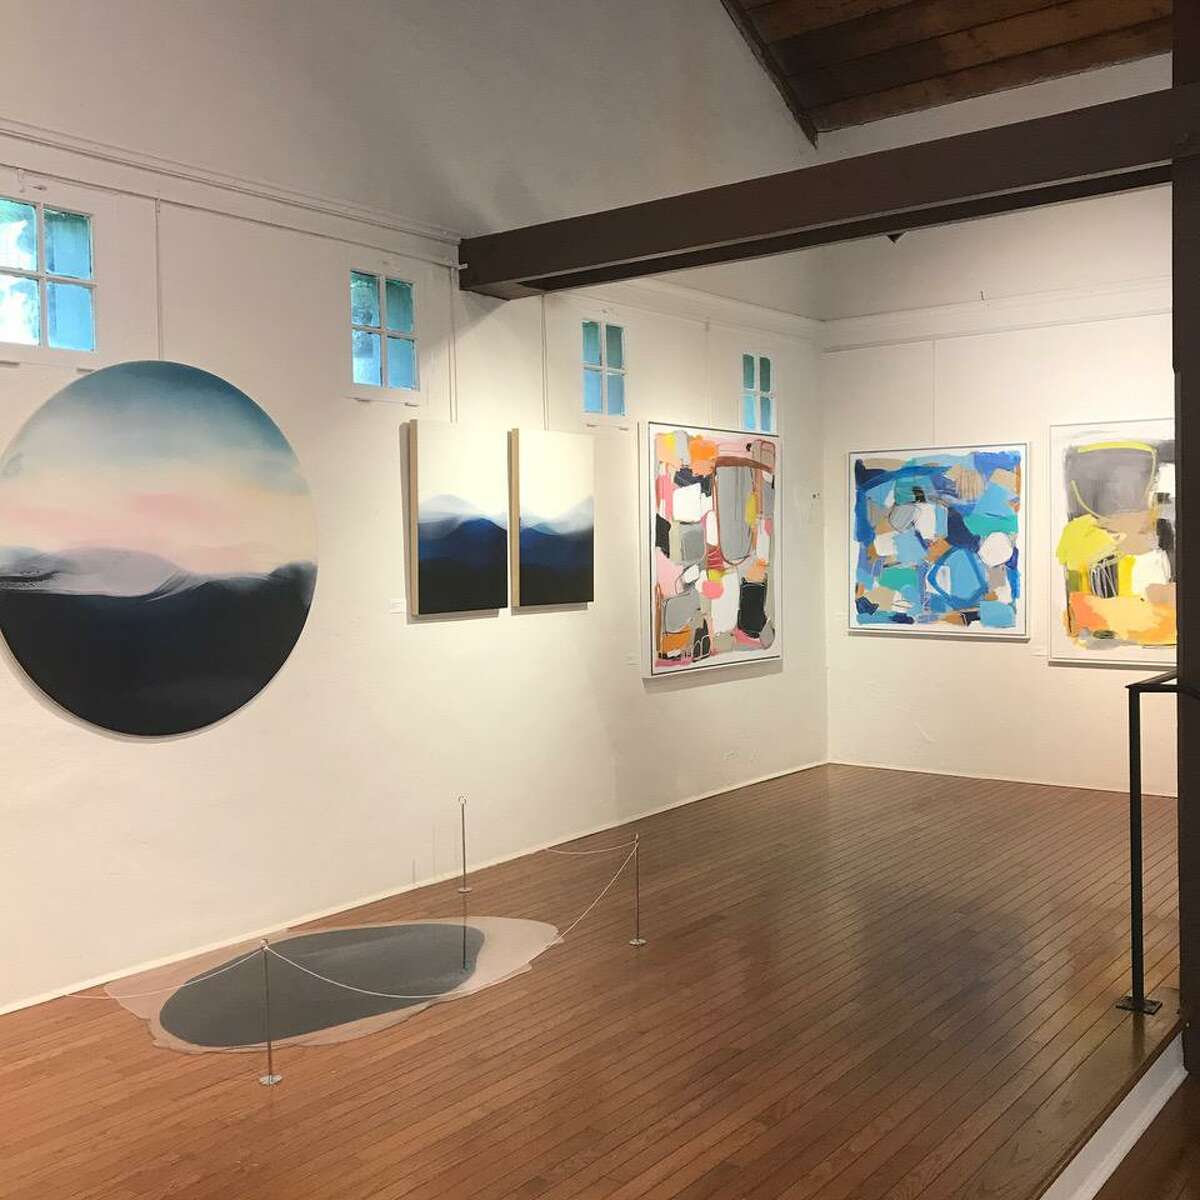 The Carriage Barn Arts Center in New Canaan is accepting entries for its 30th annual SPECTRUM Contemporary Art Show: VISIONS 2020.